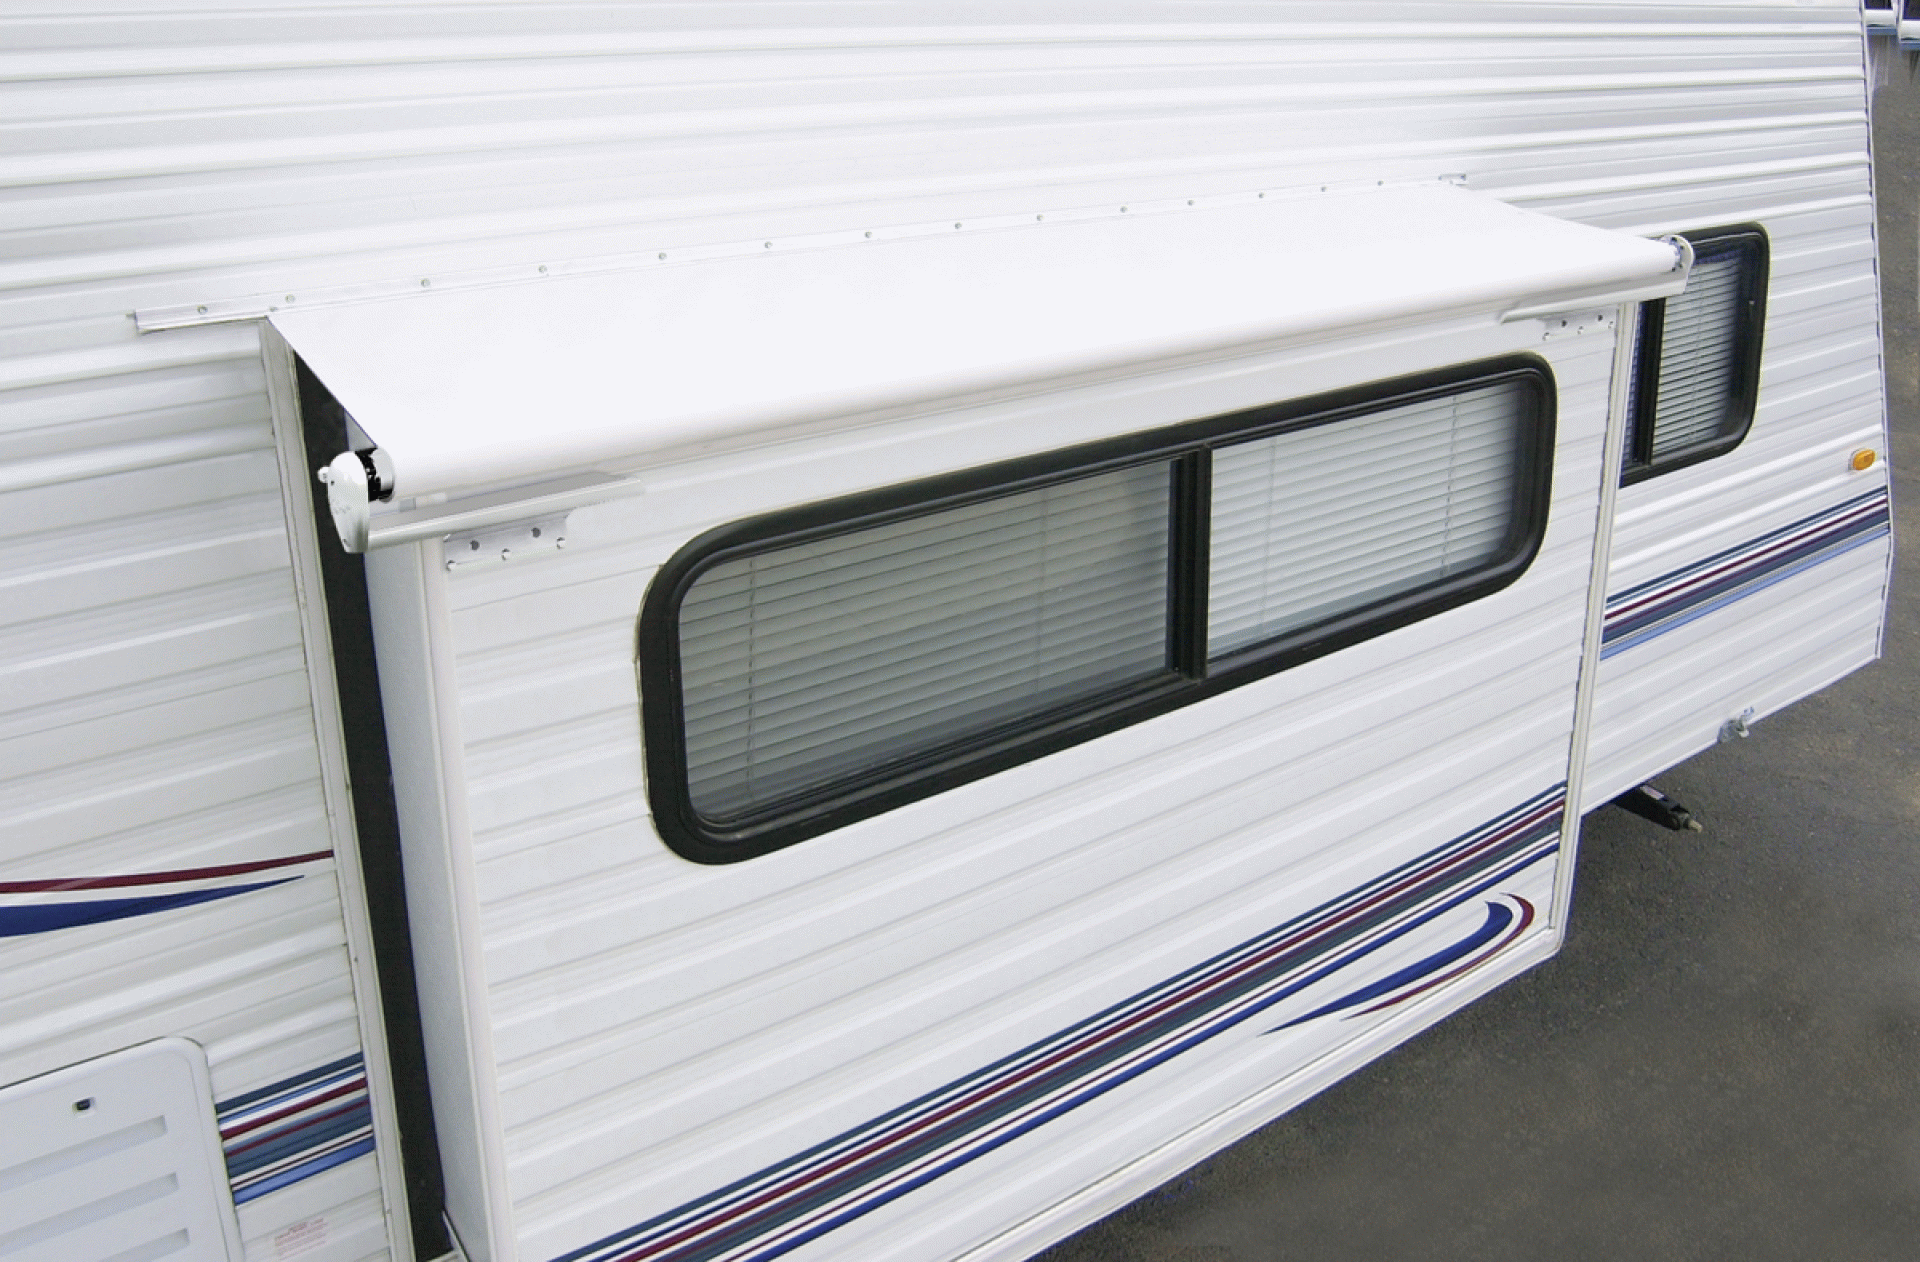 CAREFREE OF COLORADO | LH1376242 | Slideout Cover Awning 130" - 137.9" Roof Range Solid Black Vinyl